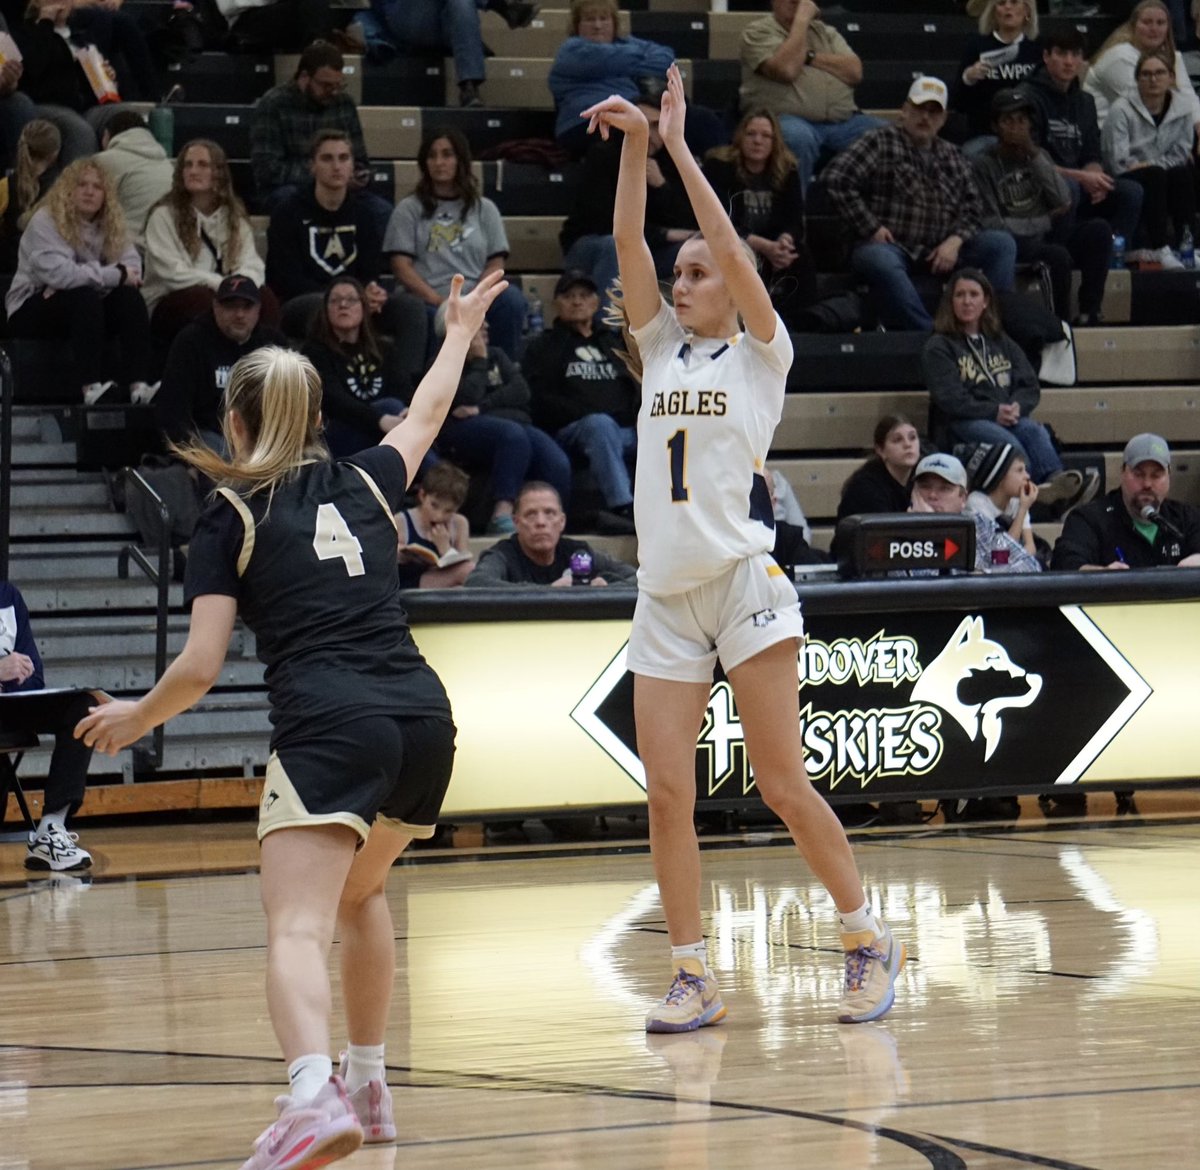 Real tough news of a torn ACL for this great kid. Was having a terrific year for top 10 AAA Totino Grace…17ppg, 4 spg, 3 apg, shooting 40% from 3 & 80% from FT. 

No doubt that Maria will come back stronger though & her best ball is yet to come. #Furyfam 💛🩵